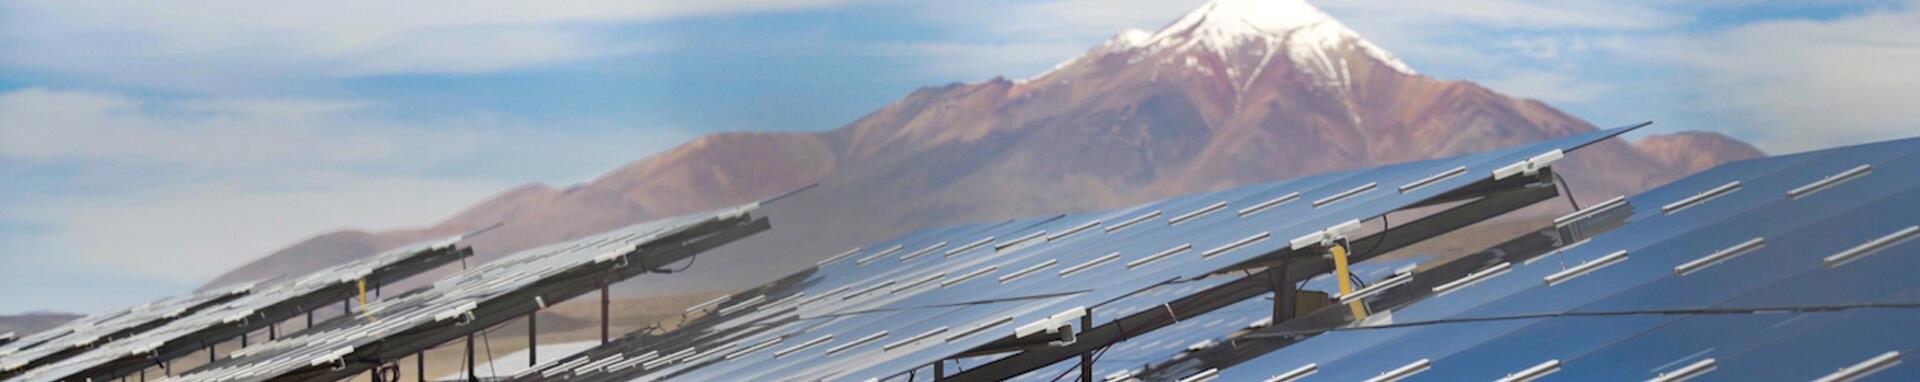 CIF Action Solar Panels in Ollagüe, Chile Copyright CIF 2018